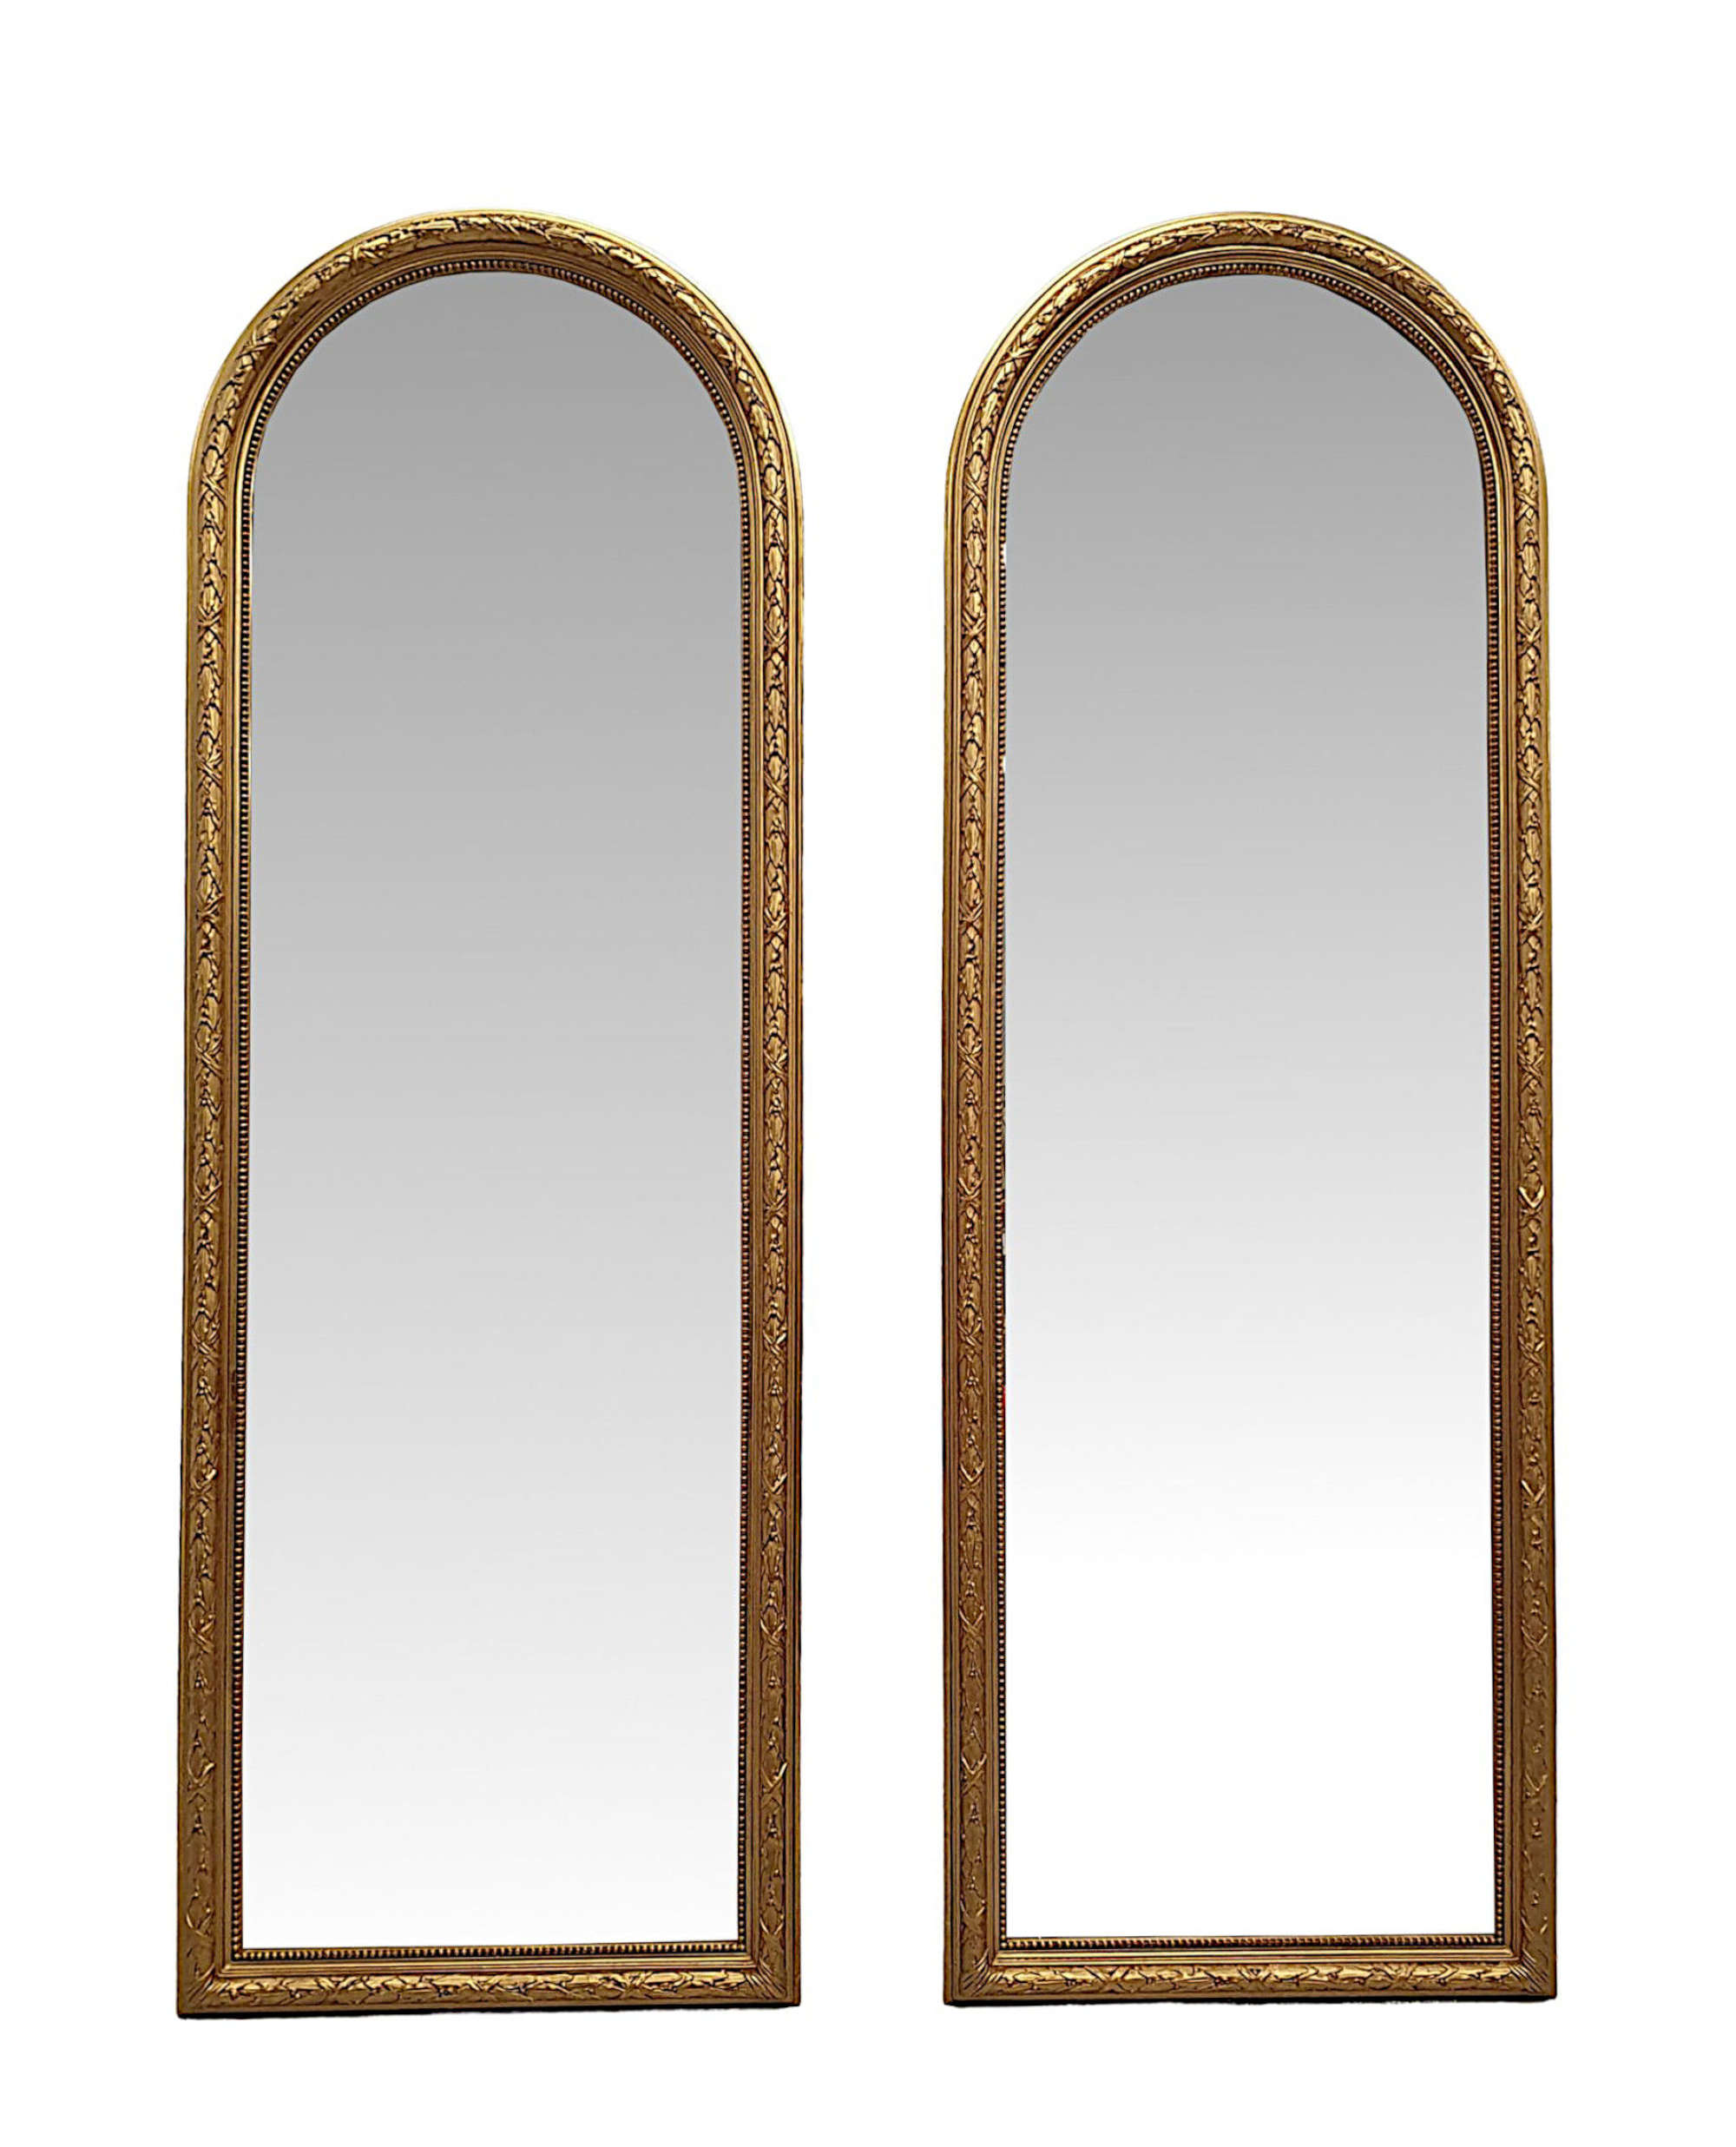 A Very Rare and Fine Pair of 19th Century Giltwood Arch Top Pier Mirrors